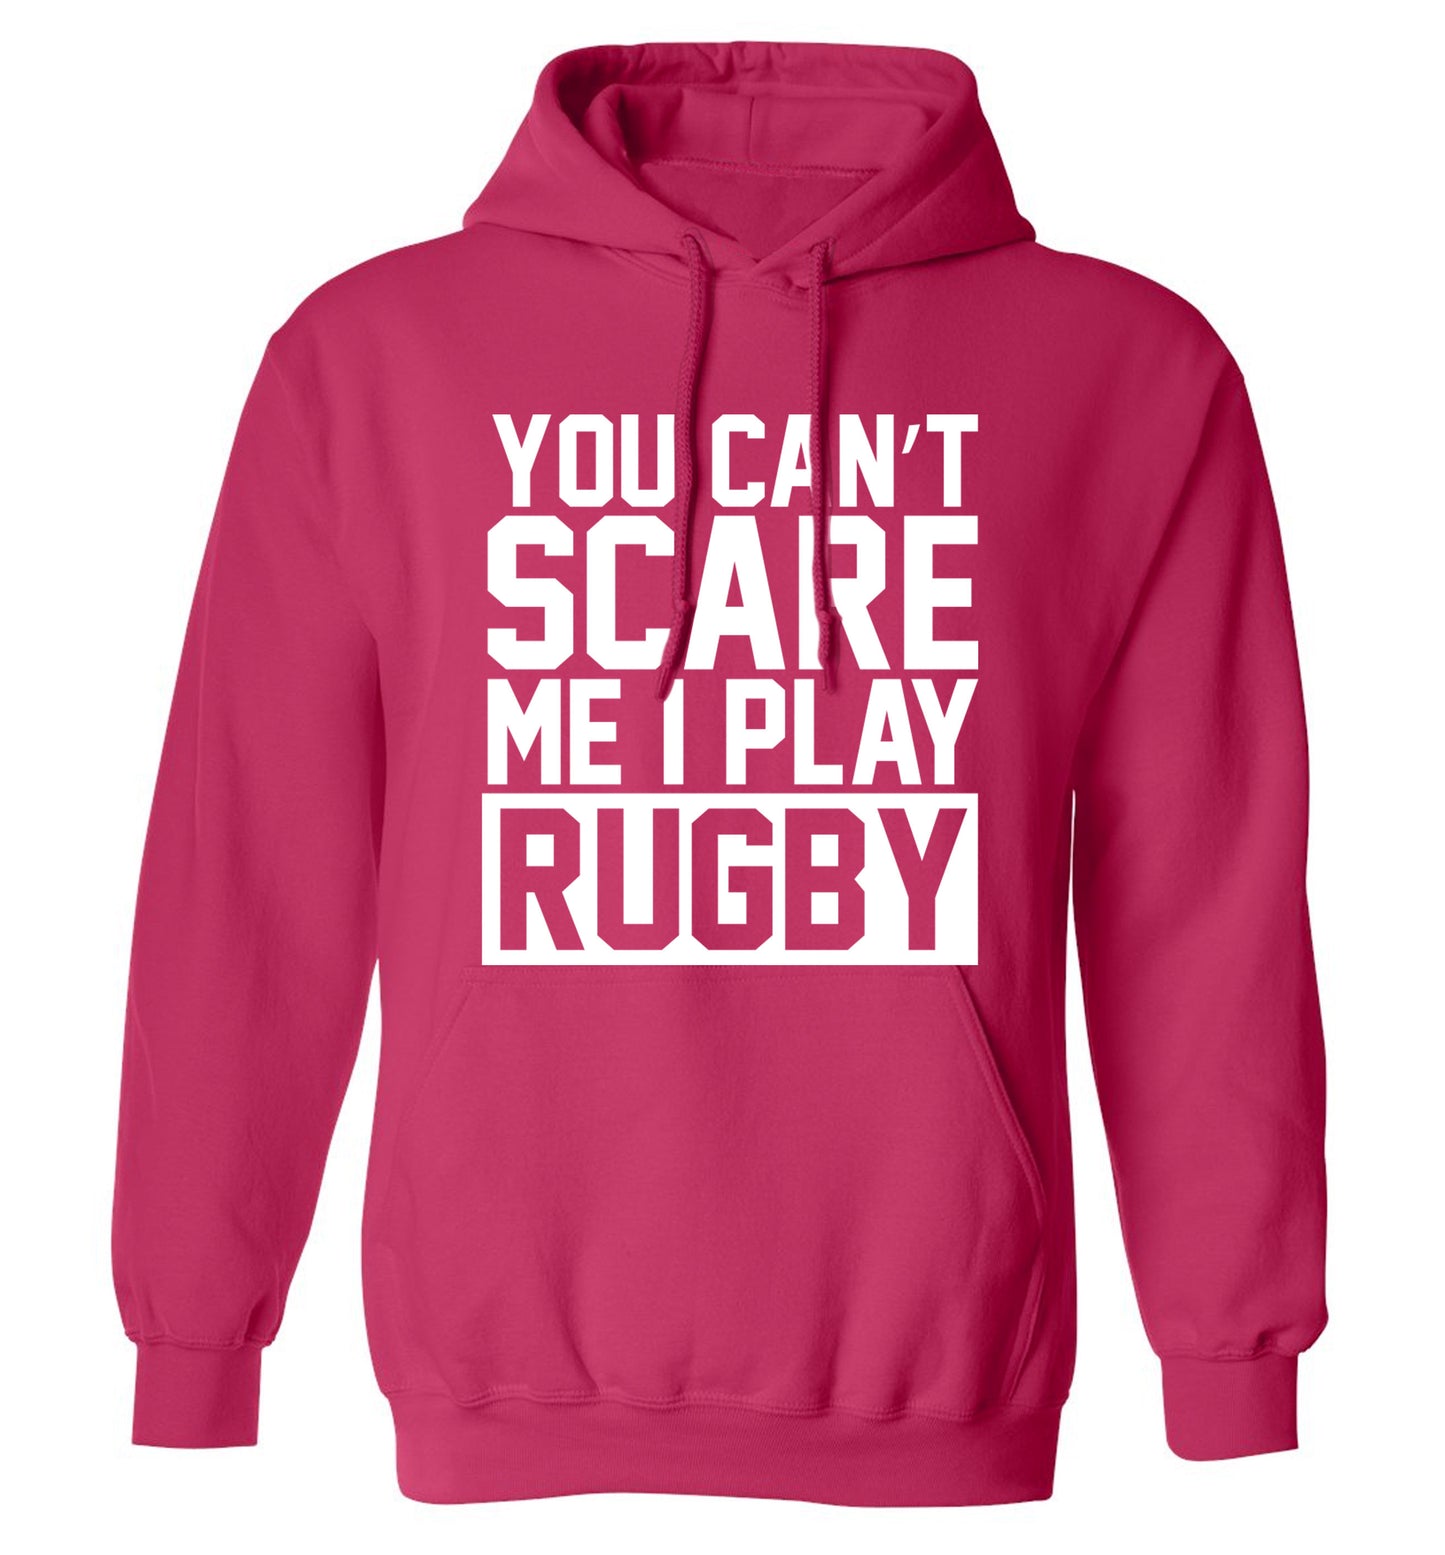 You can't scare me I play rugby adults unisex pink hoodie 2XL